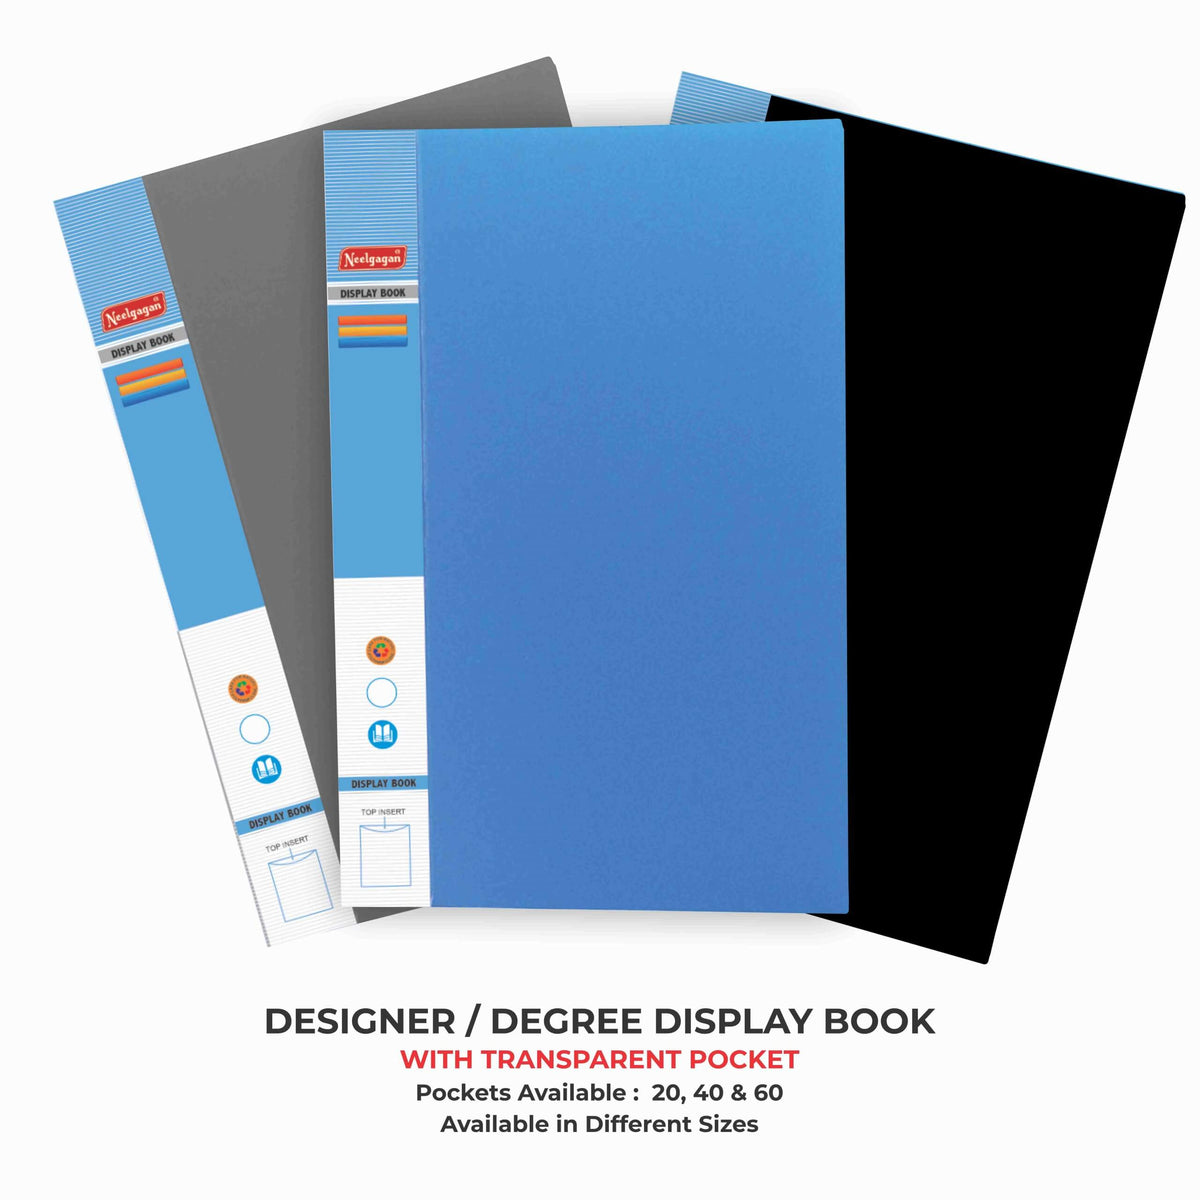 Display Book F/S - Premium (Suitable for storing larger documents) - Size: 24.0cm x 35.0cm